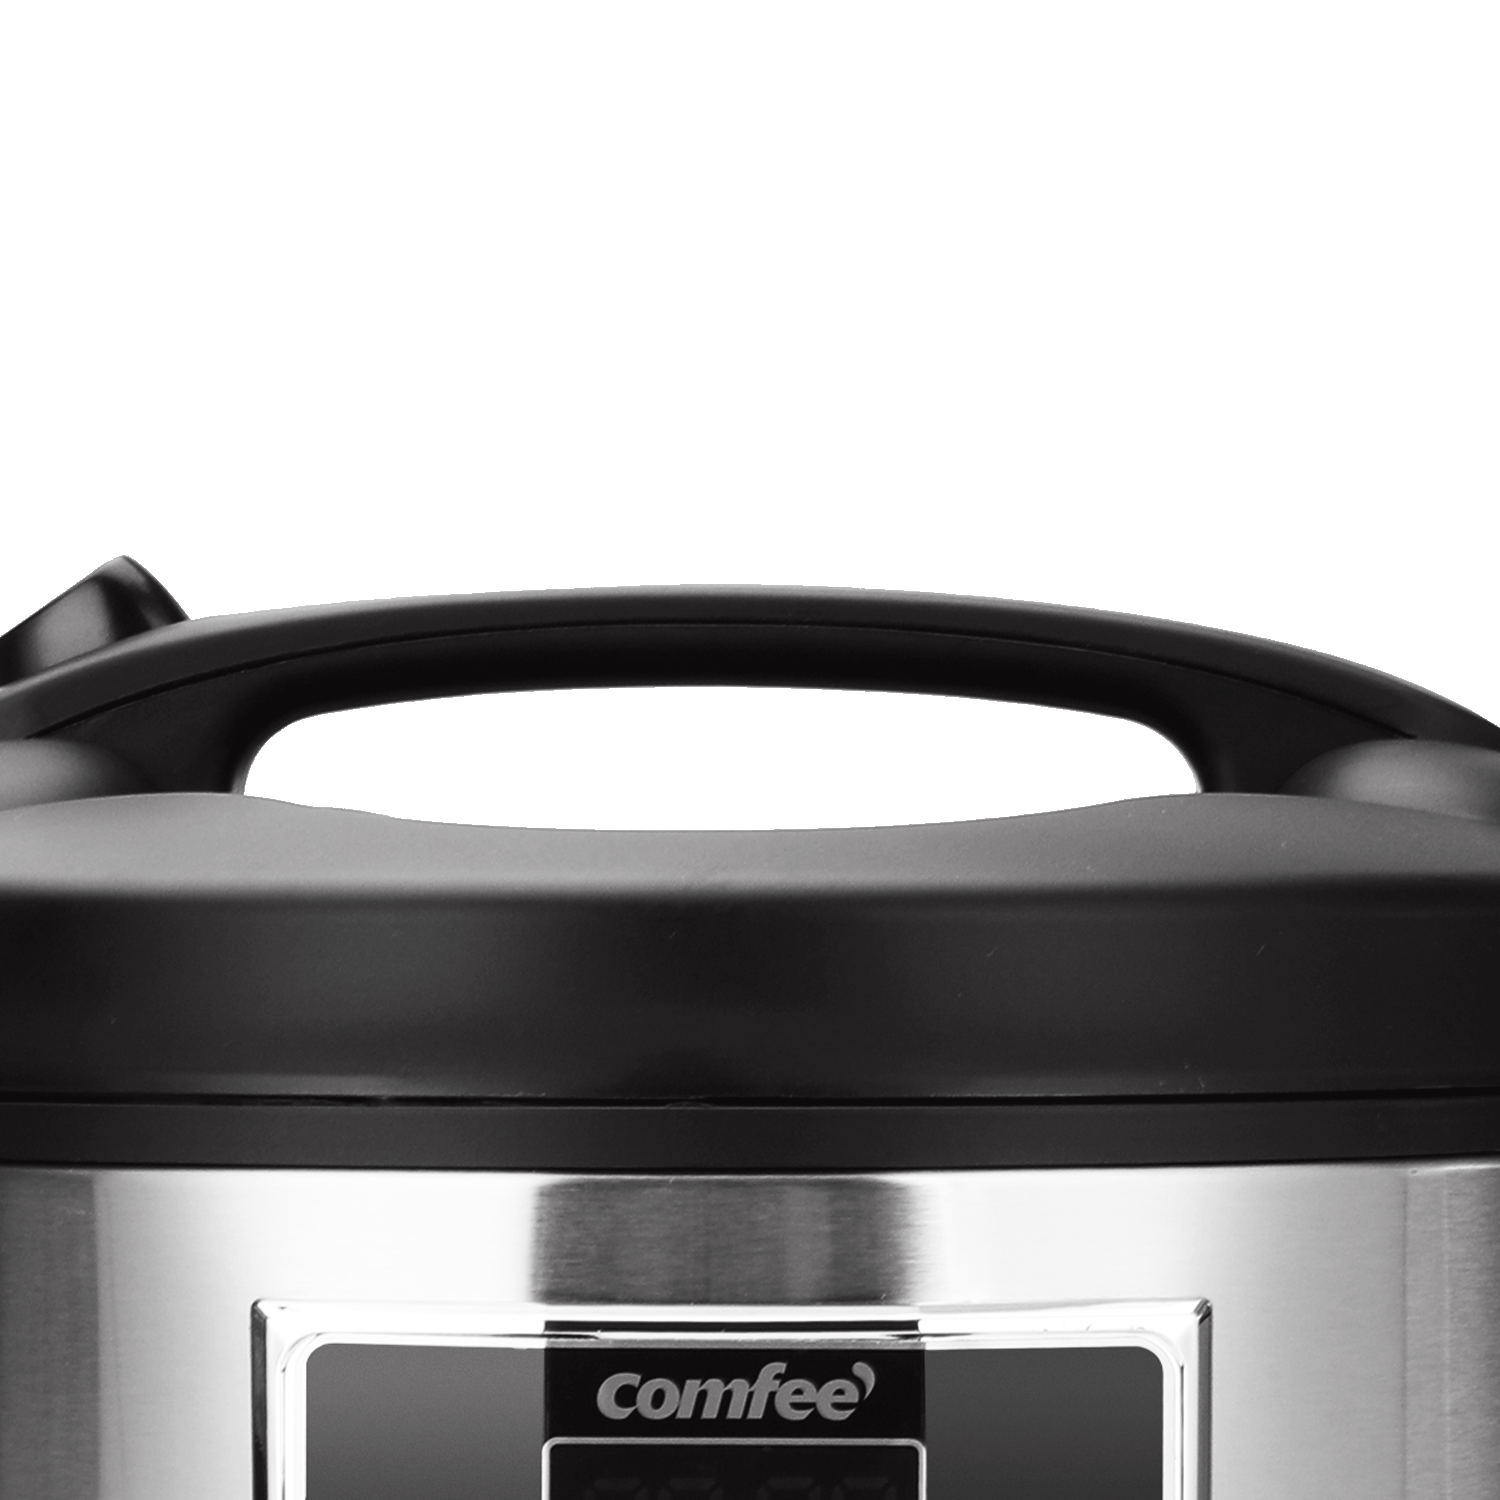 COMFEE Rice Cooker, Slow Cooker, Steamer, Stewpot, Saute All in